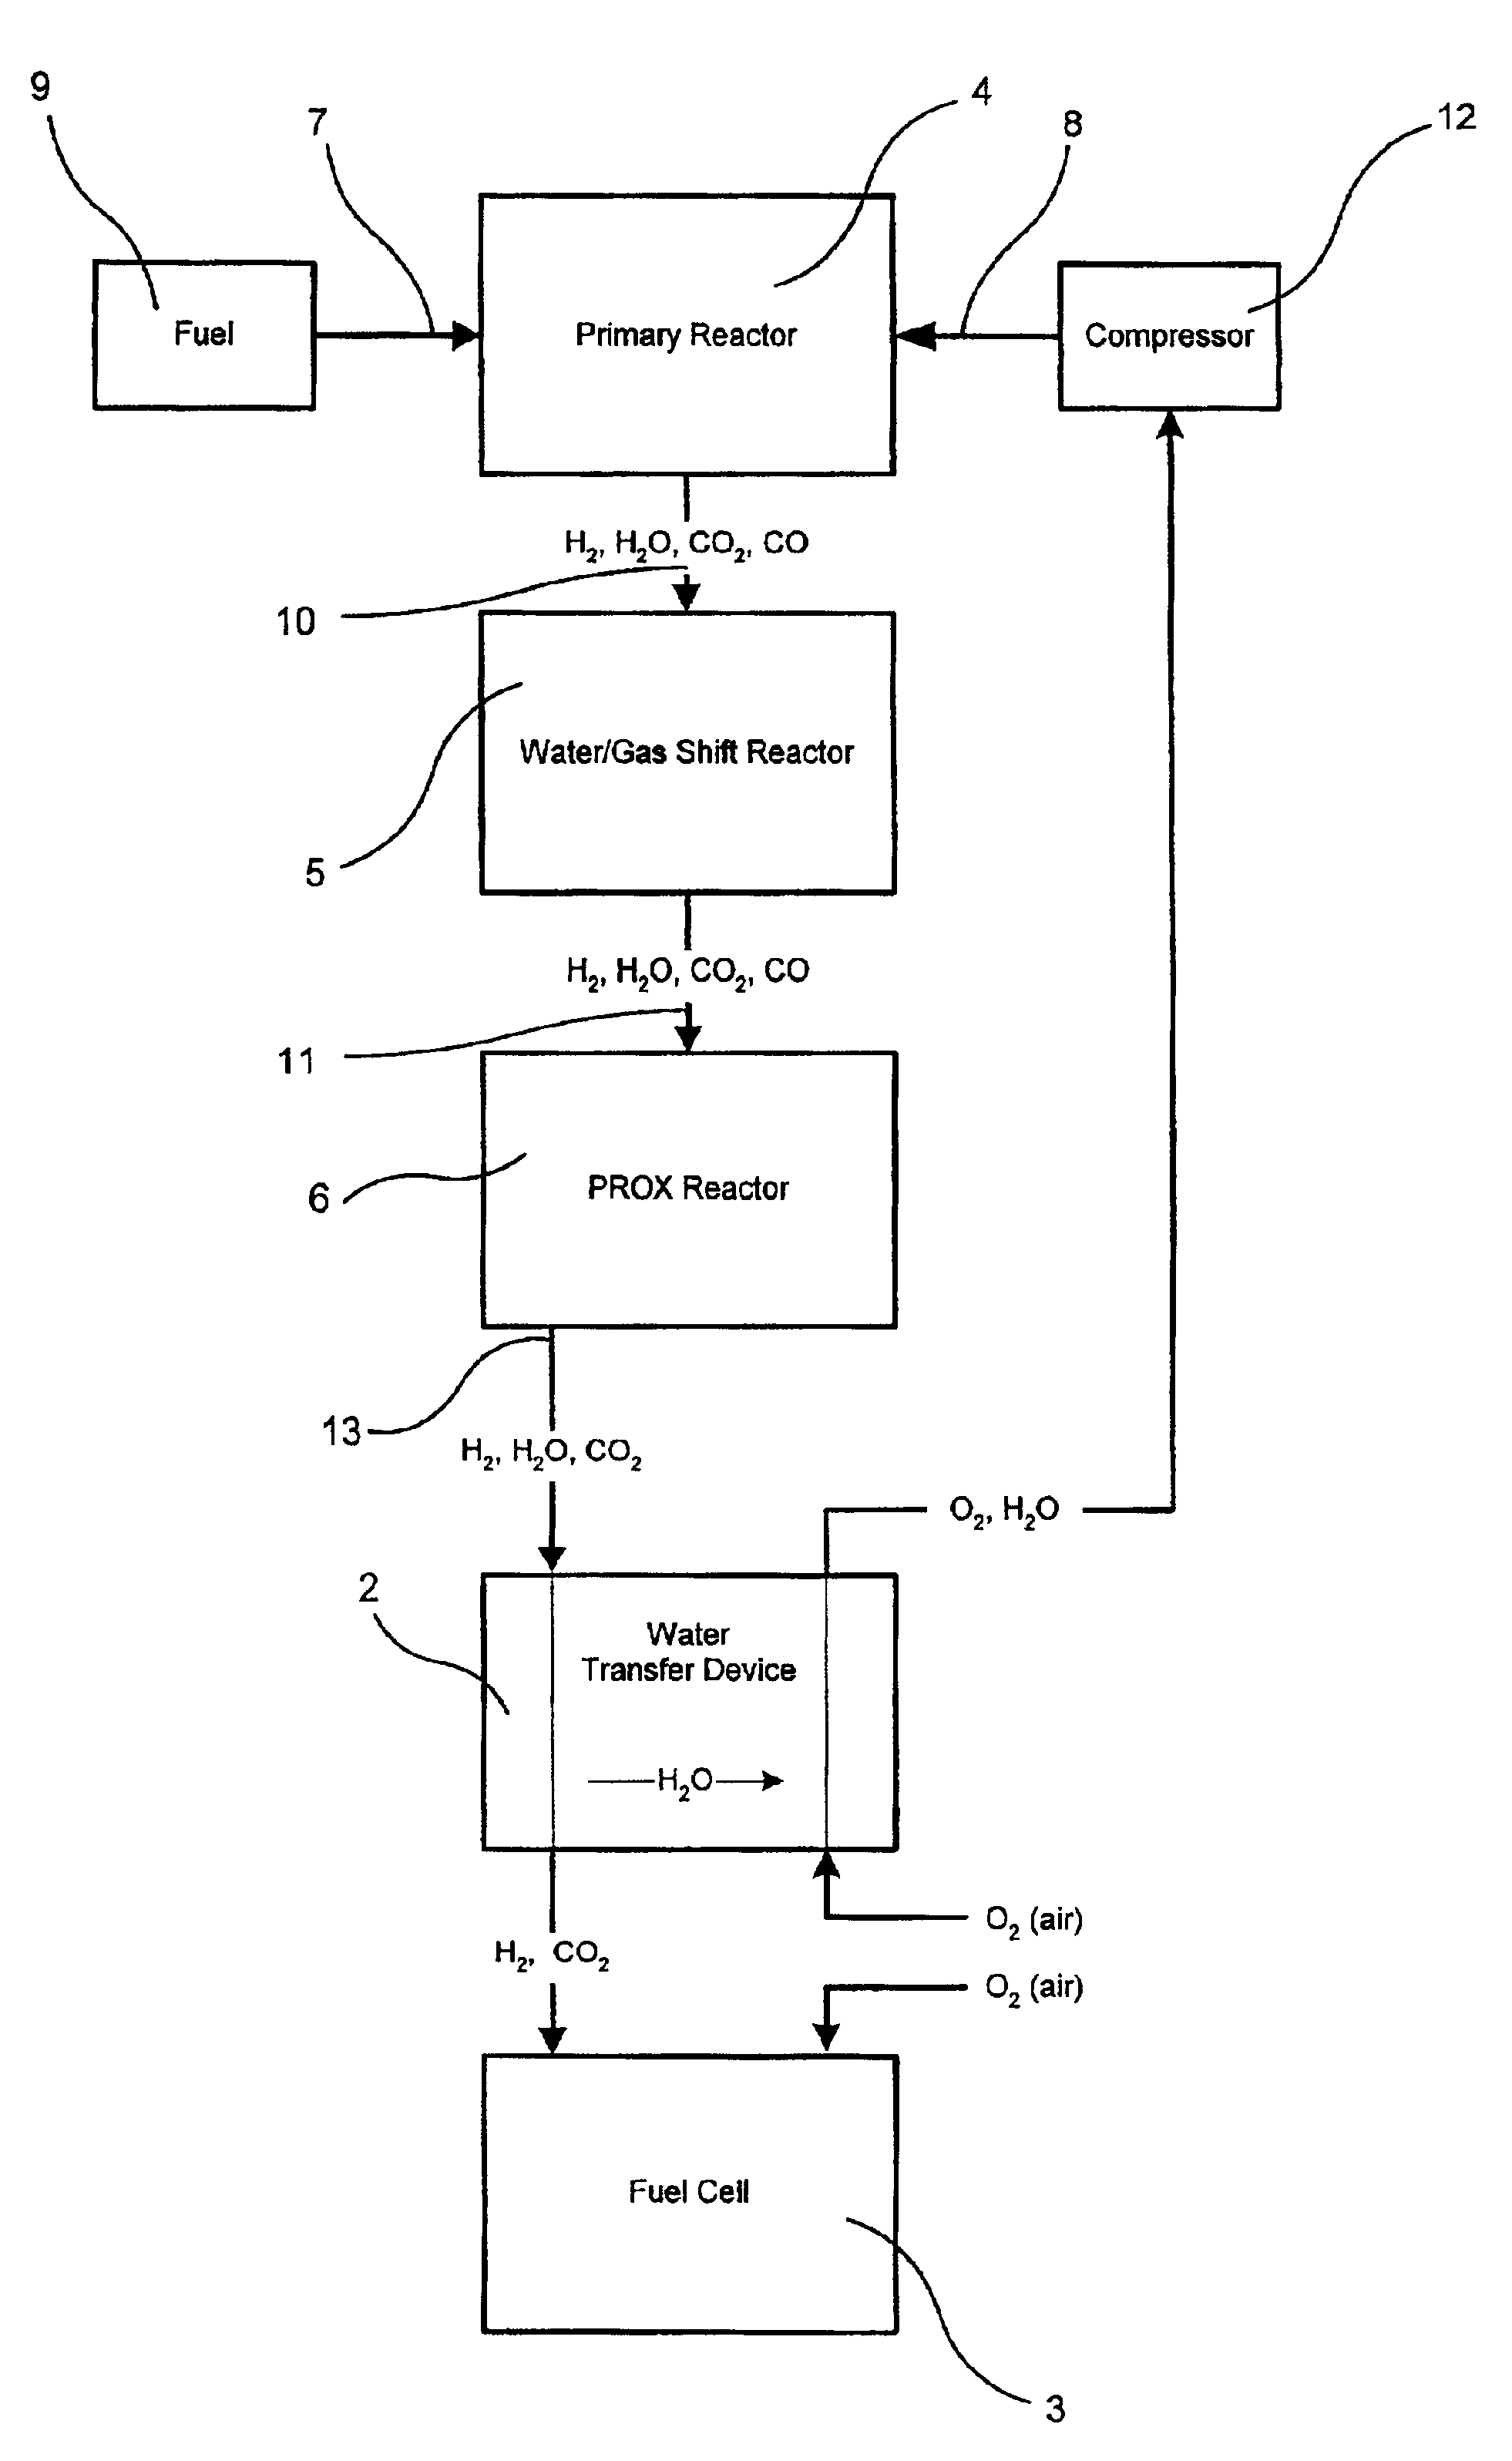 Water vapor transfer device for fuel cell reformer